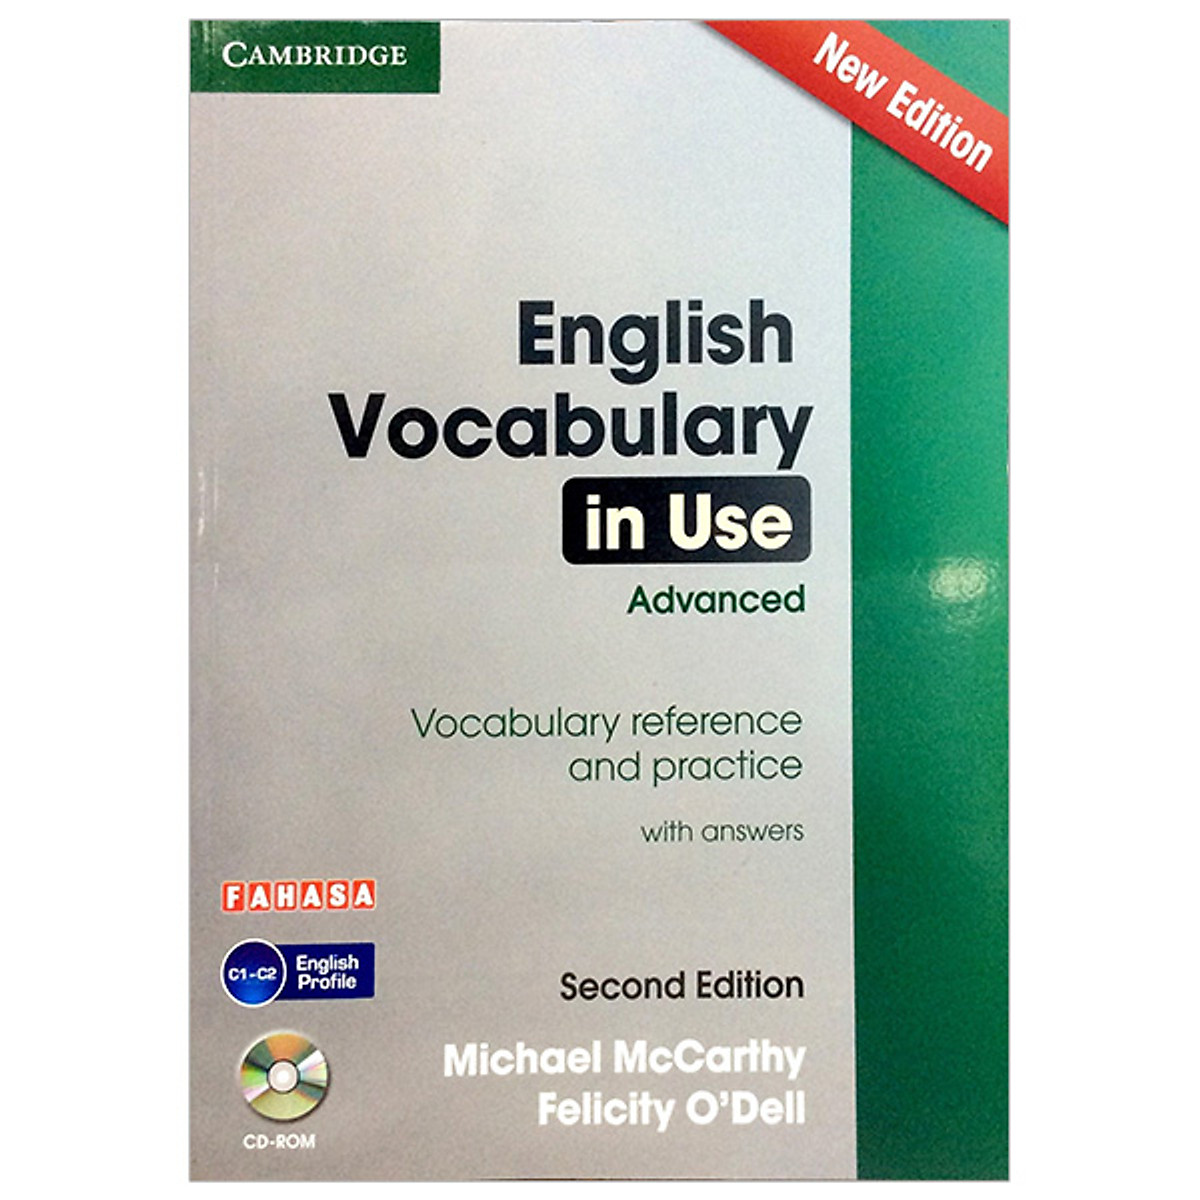 English Vocabulary in Use: Vocabulary Reference and Practice (CD-ROM)